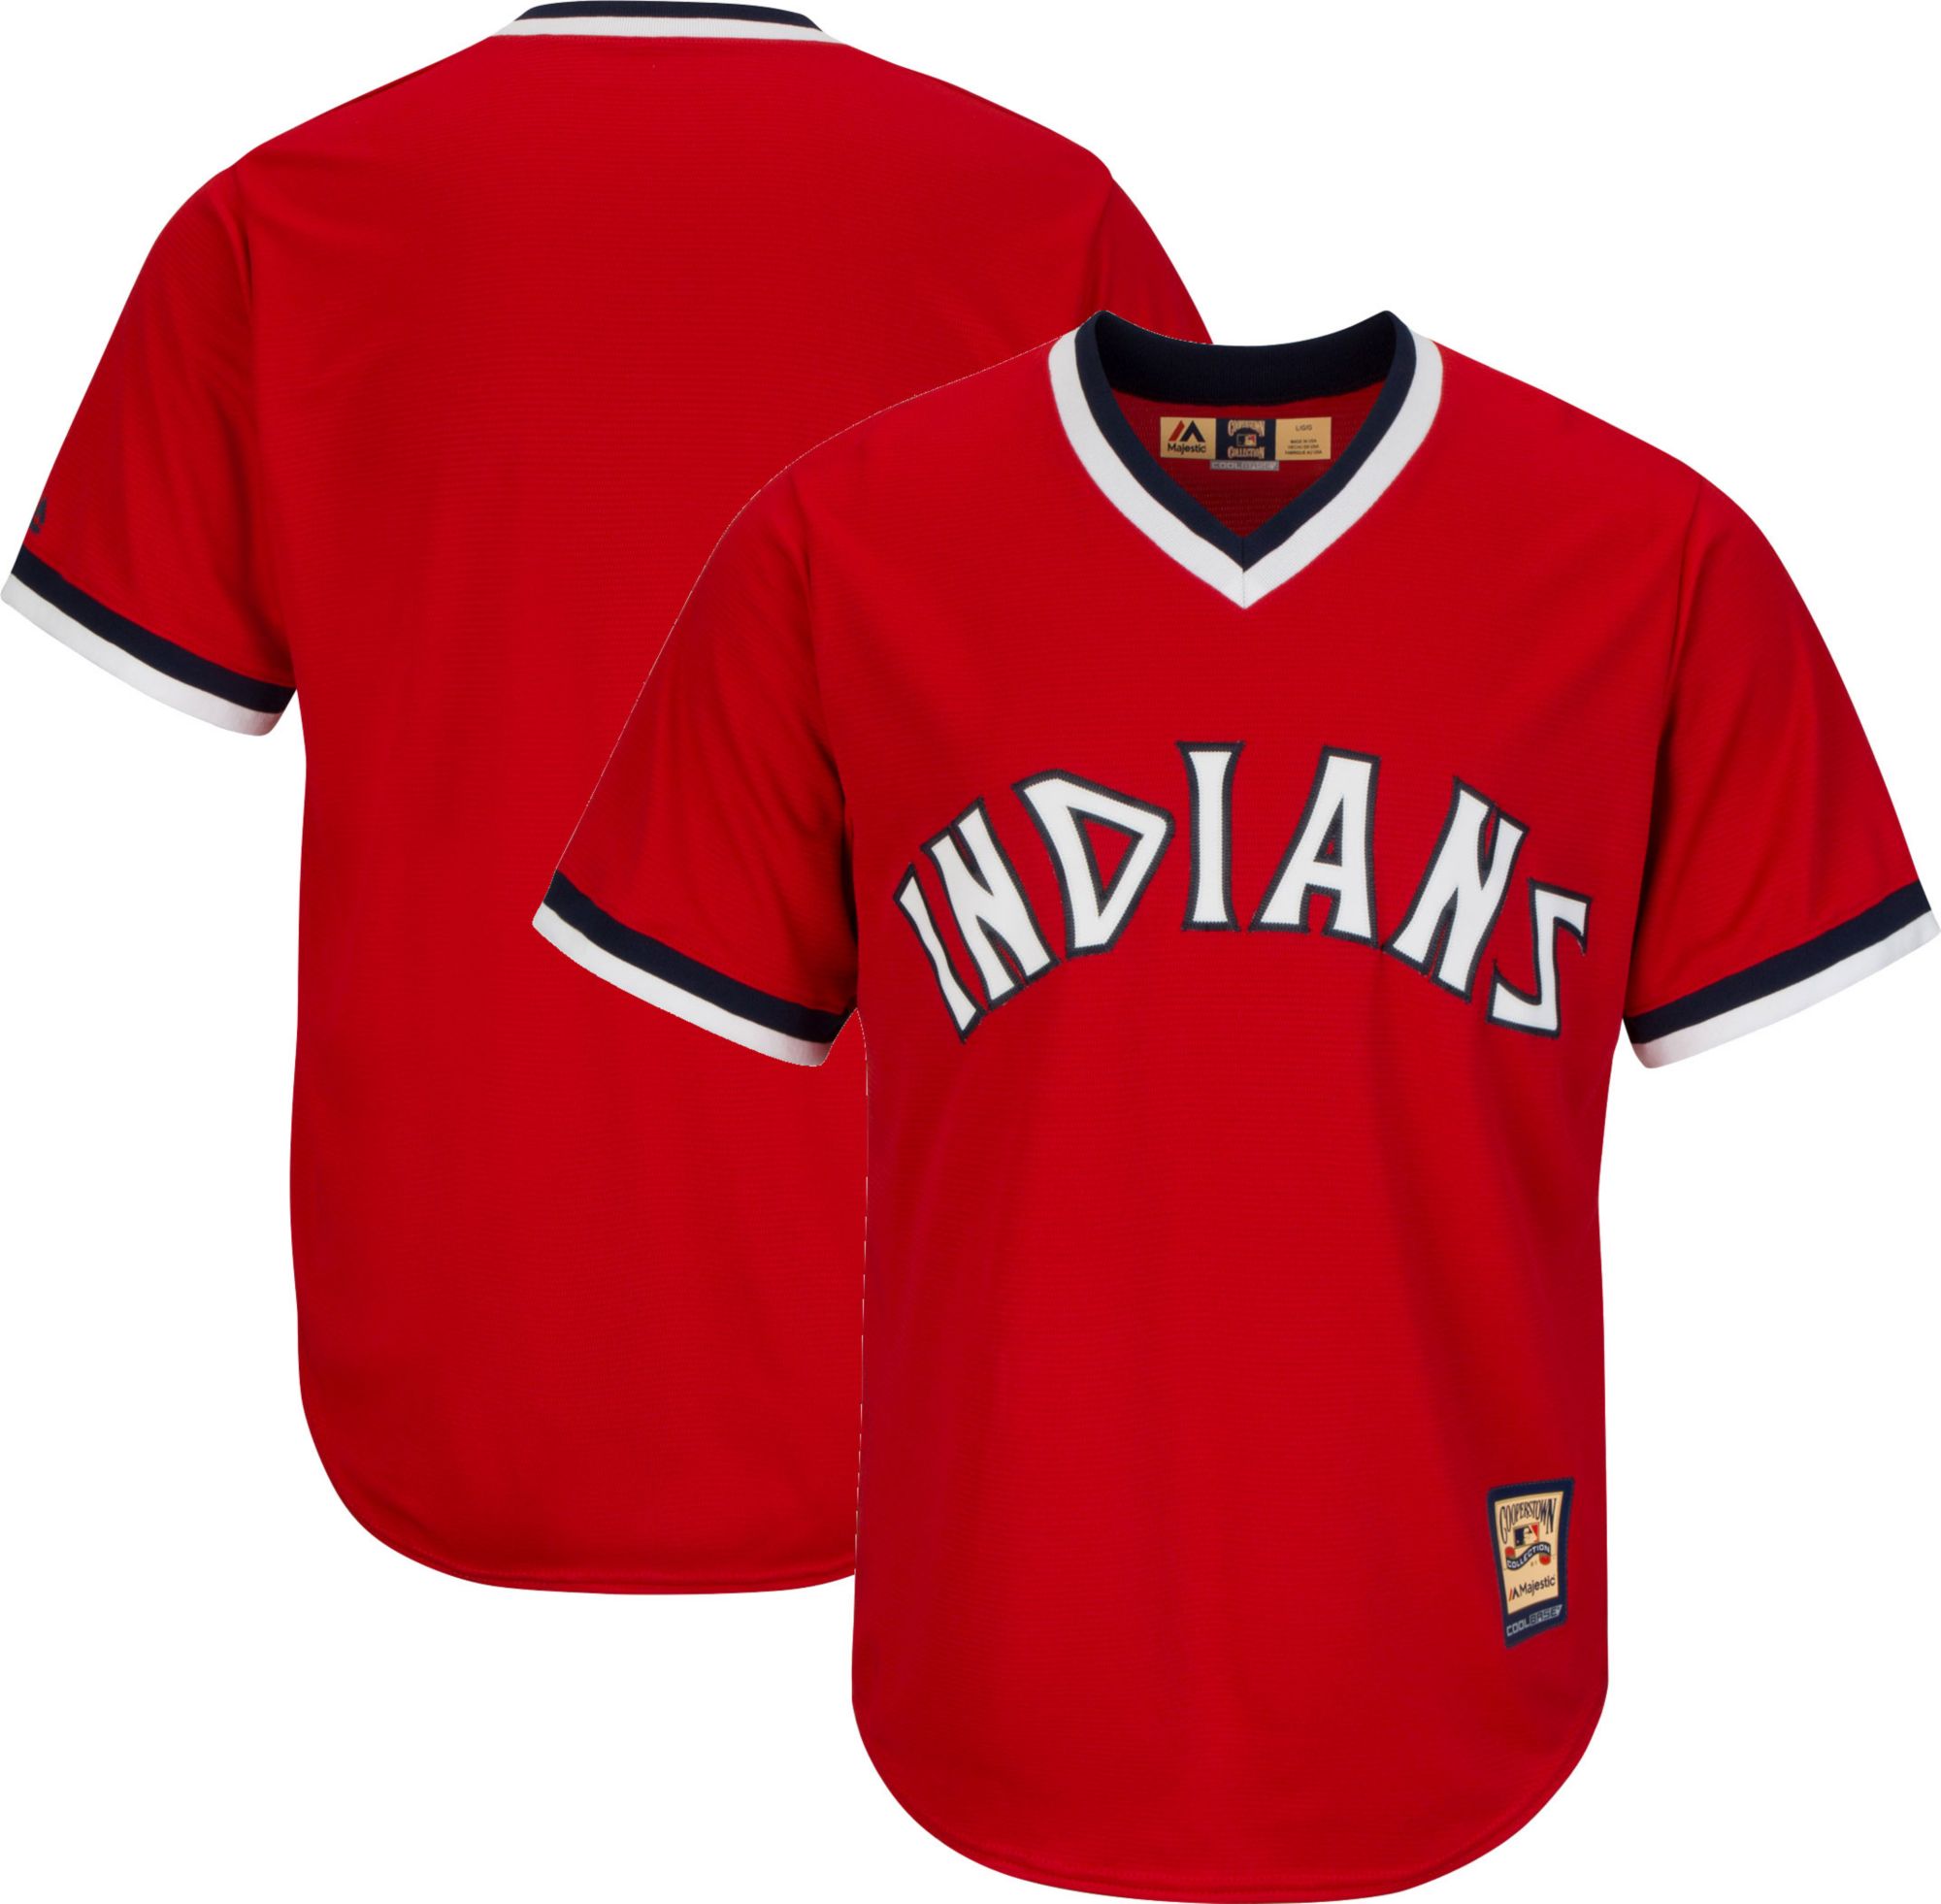 cleveland indians jersey near me